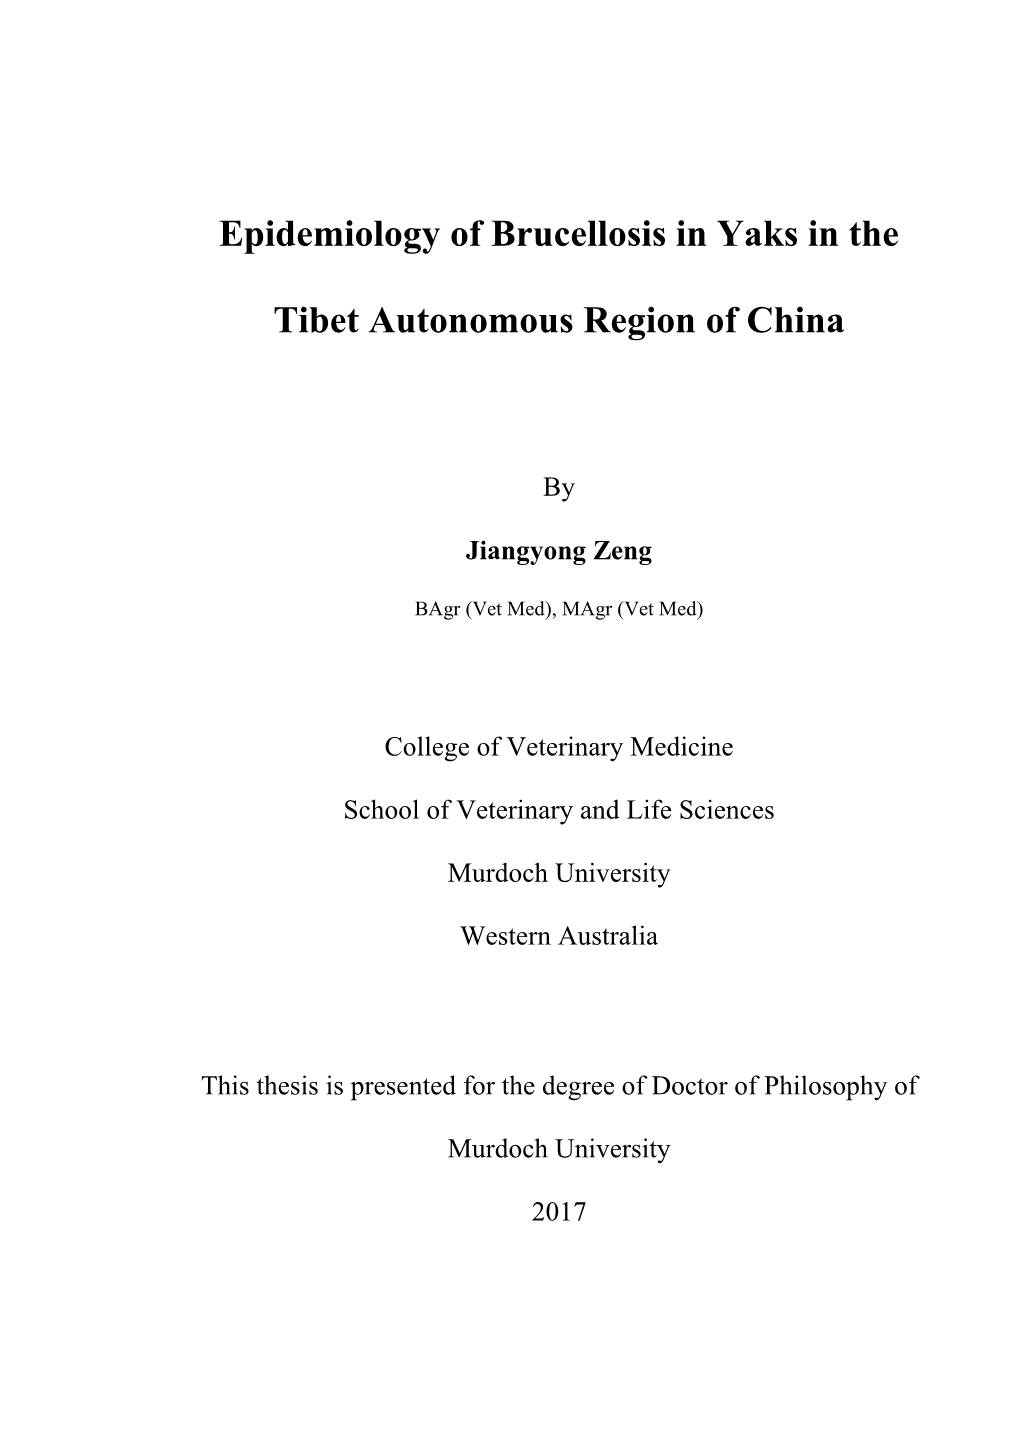 Epidemiology of Brucellosis in Yaks in the Tibet Autonomous Region of China”